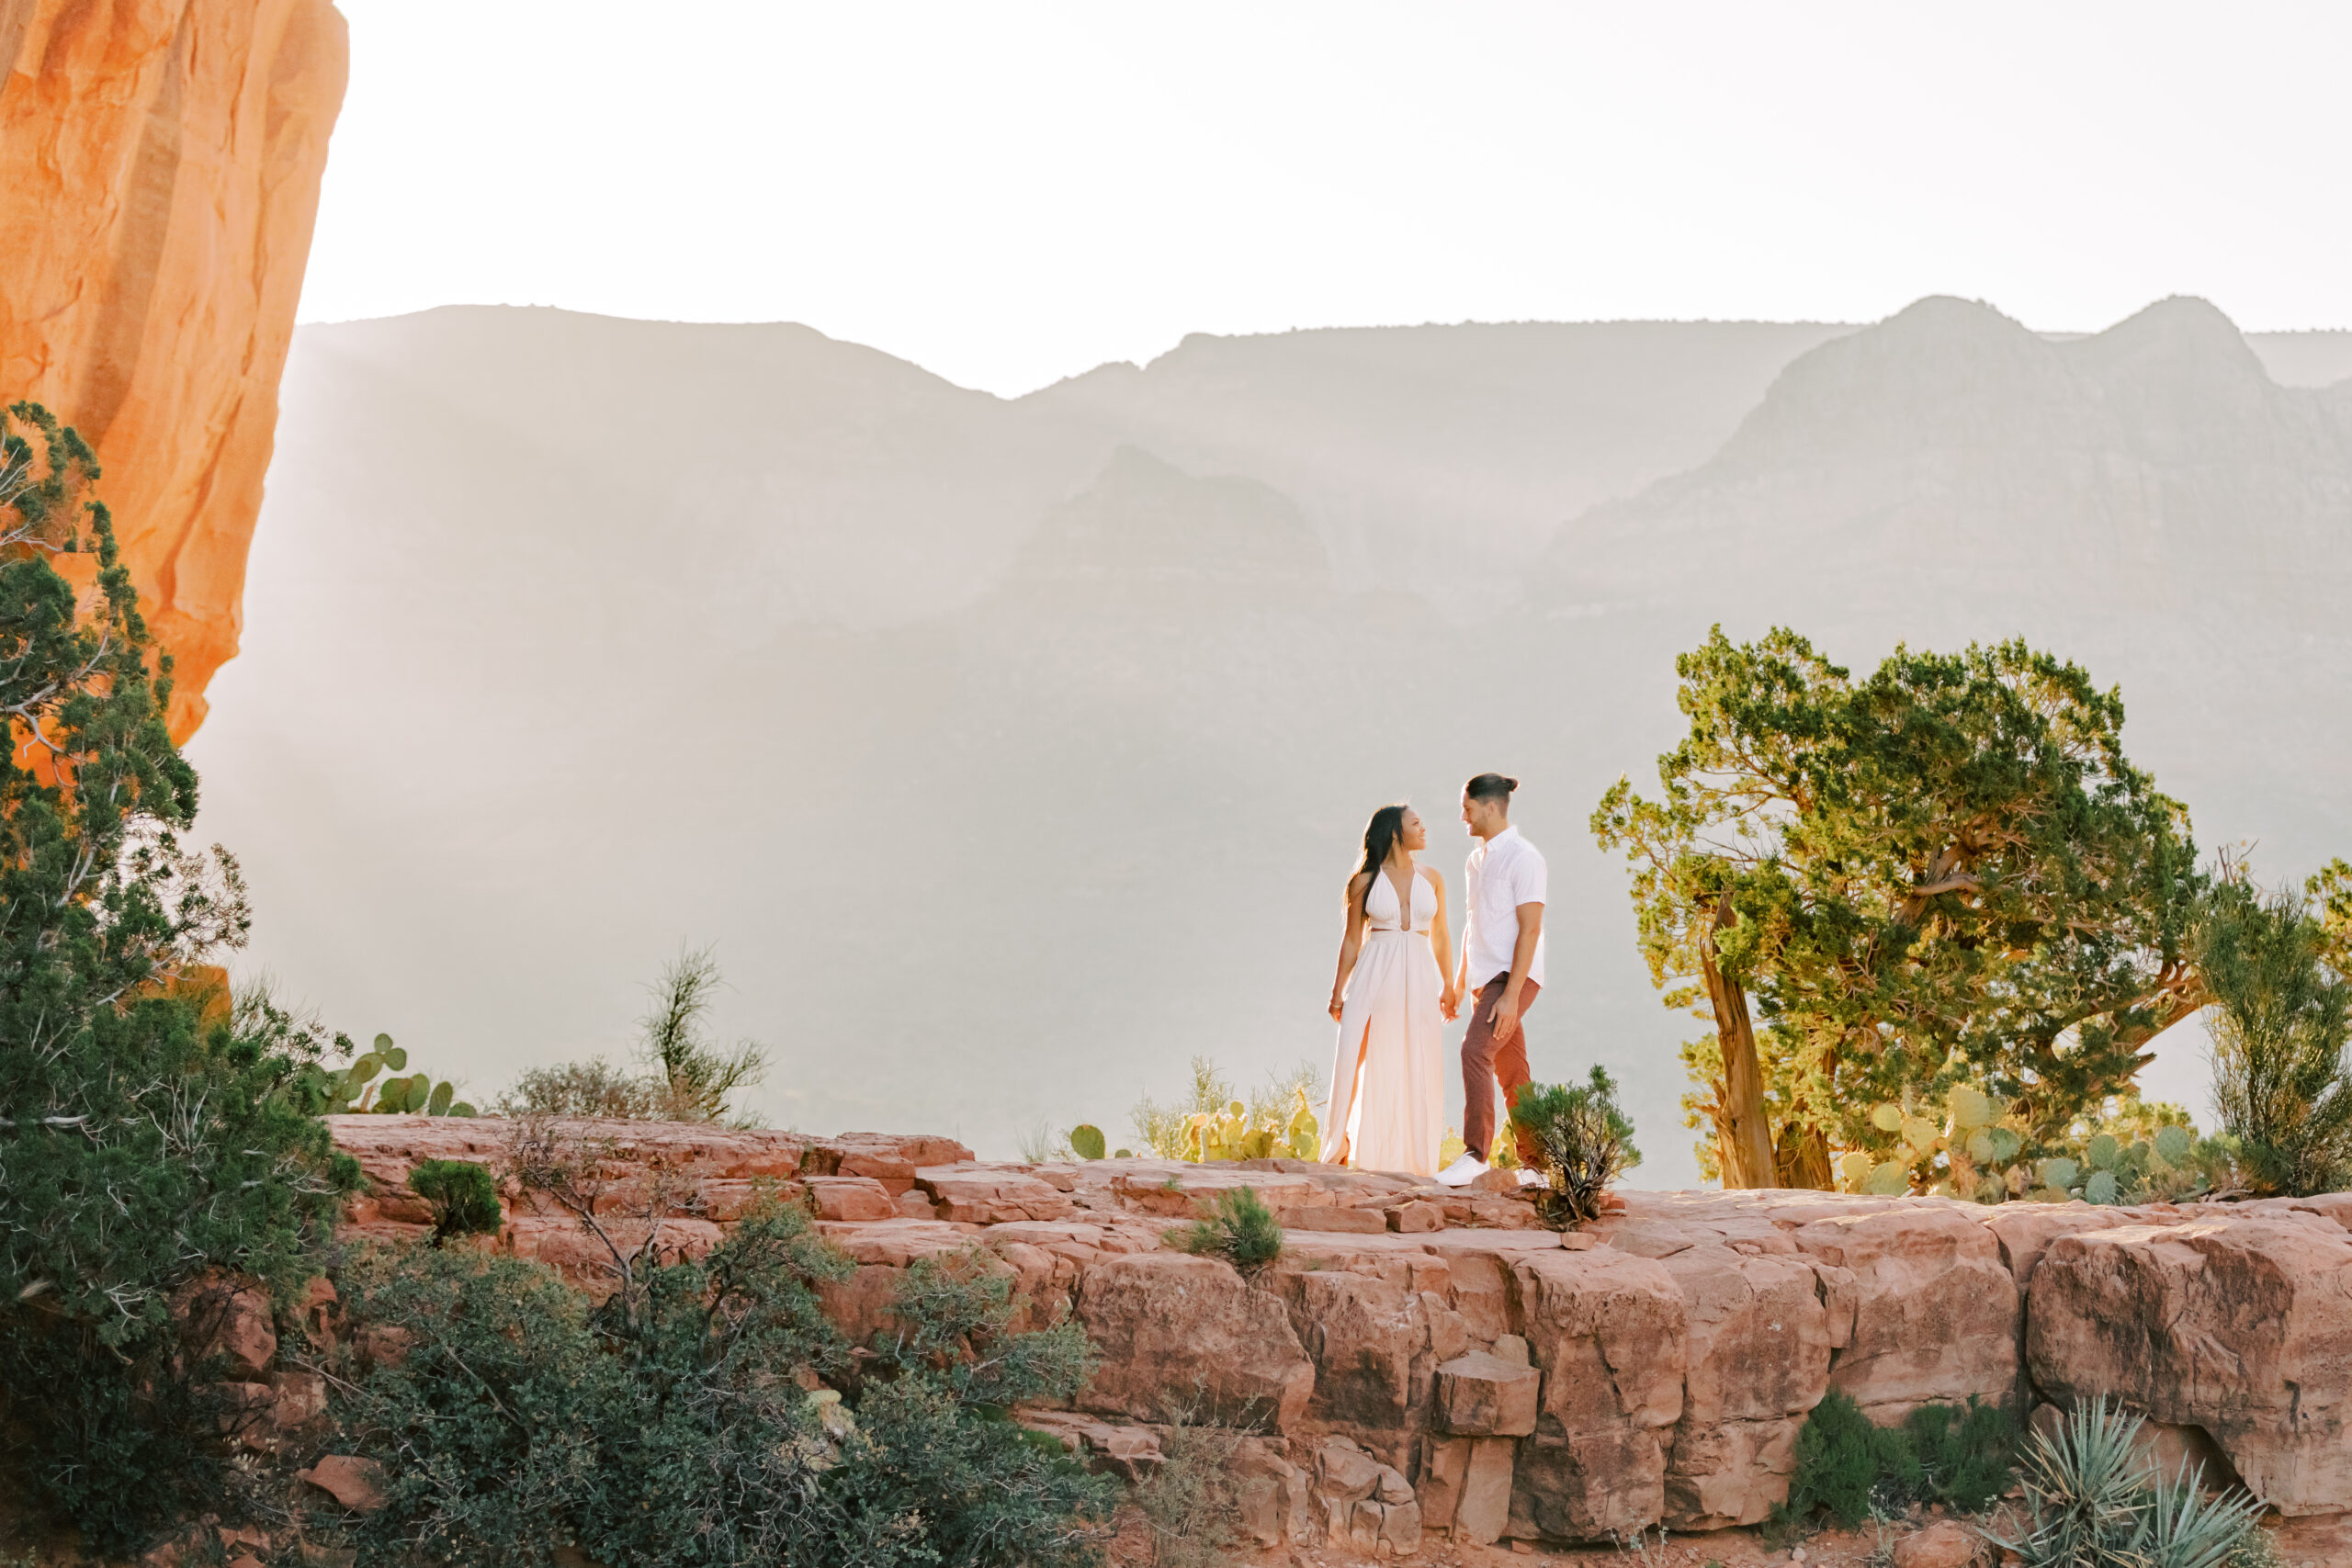 Wide Shot of Lakin and Jasmyne on Cathedral Rock: "A wide shot of Lakin and Jasmyne standing on the edge of Cathedral Rock, holding hands and gazing into the distance, with the vast and colorful Sedona landscape stretching out below them."